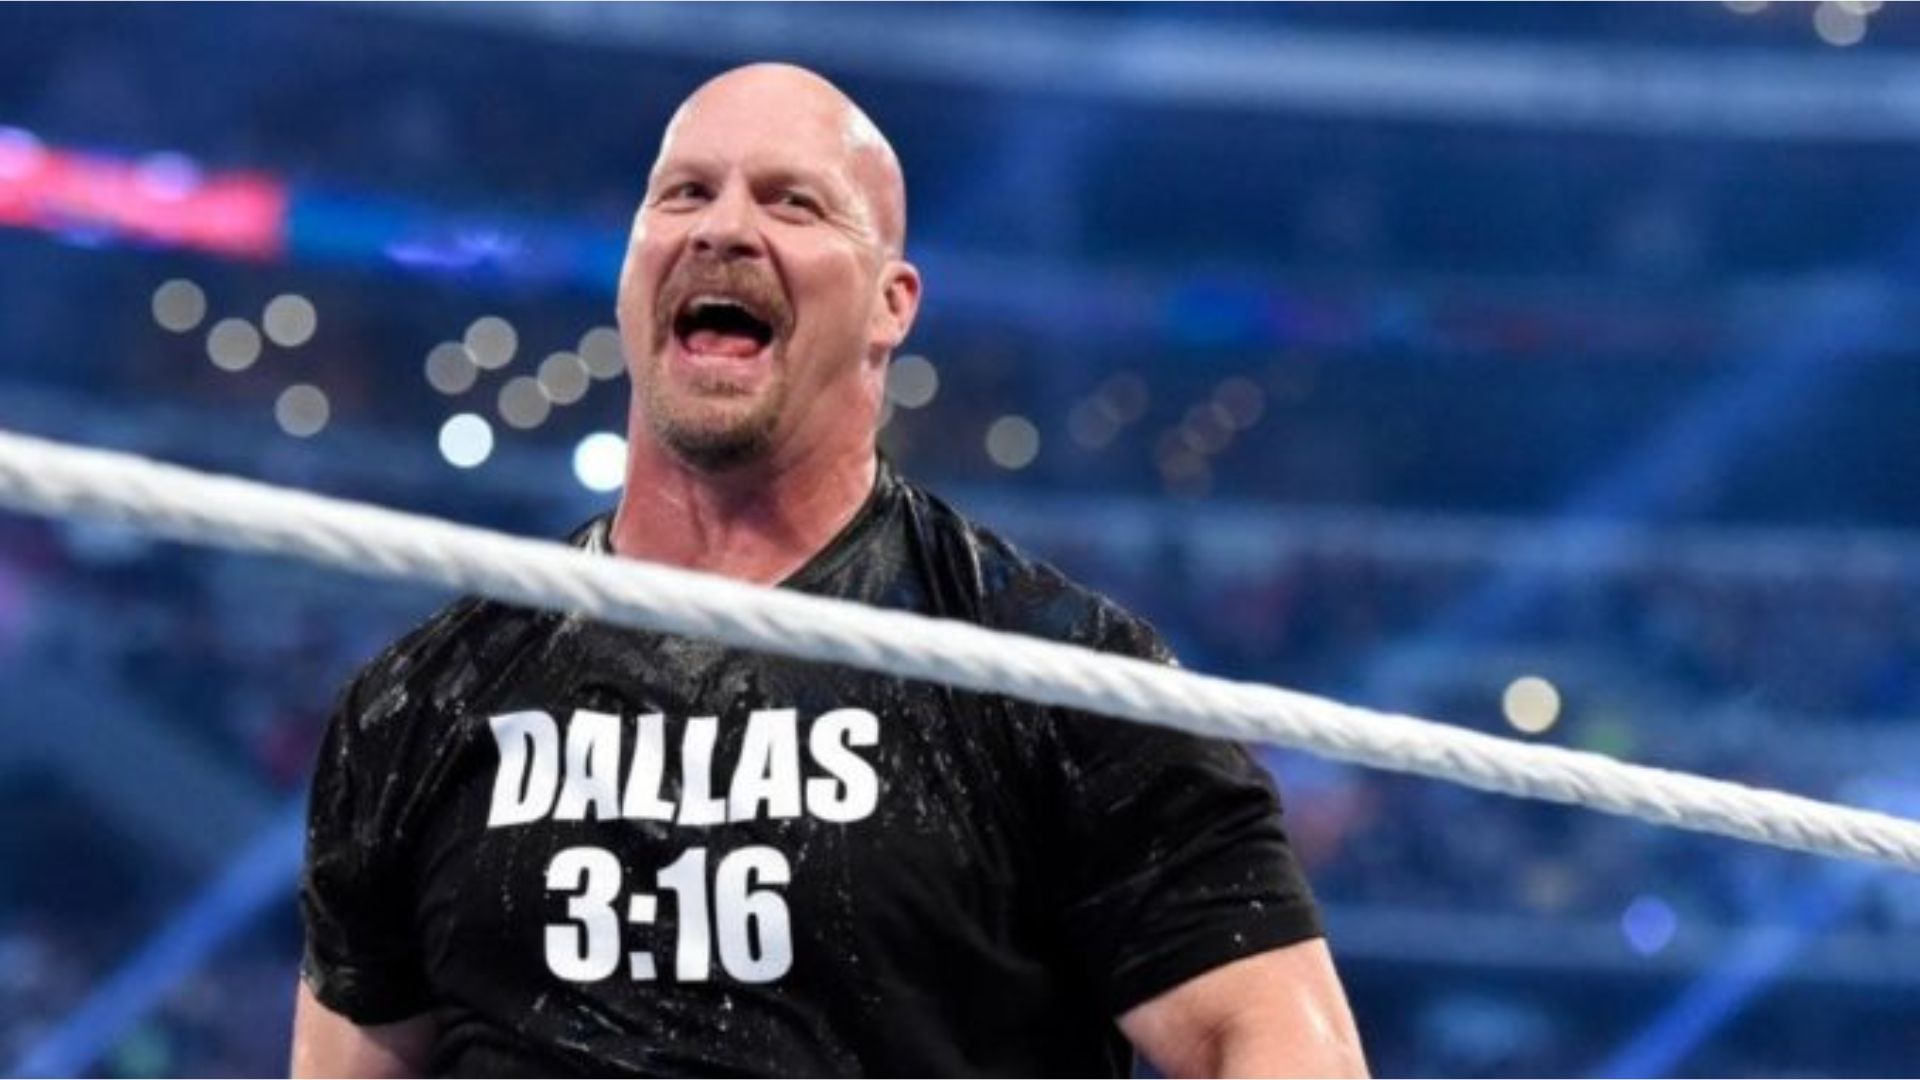 Stone Cold came out of retirement after 19 years to take on Kevin Owens.